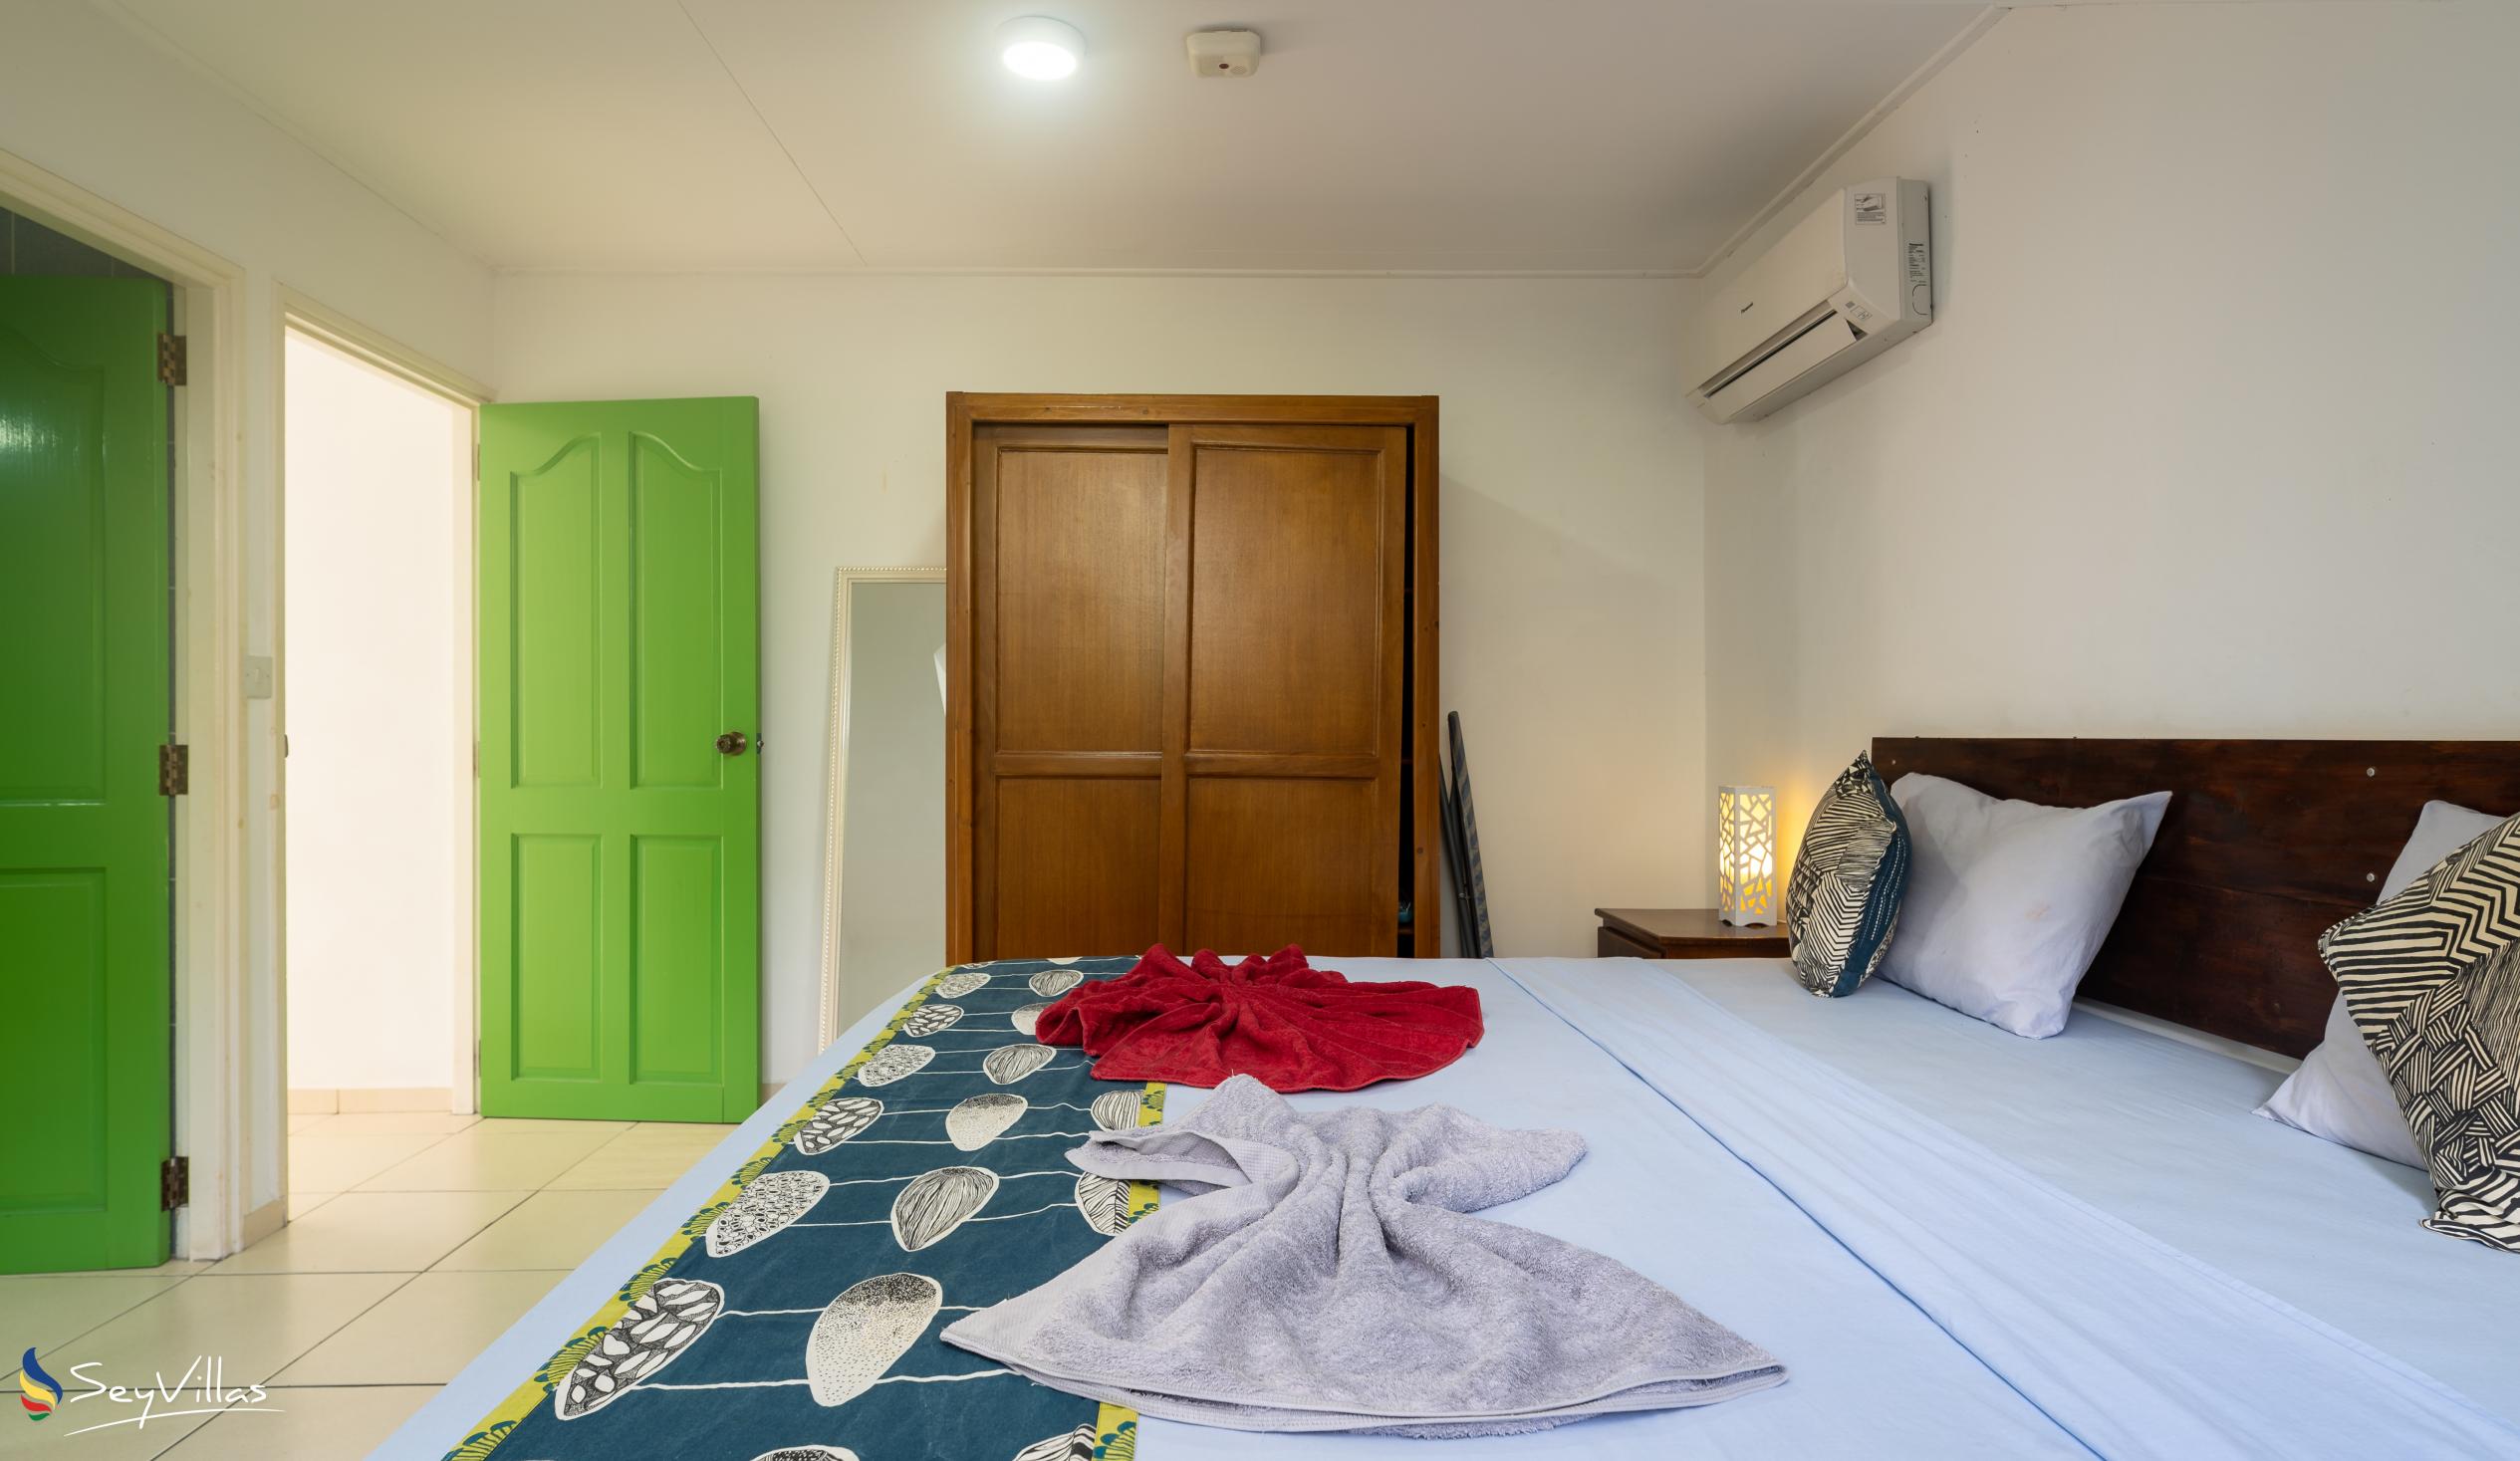 Photo 64: Chez Payet Self Catering - 2-Bedroom Apartment Coco - Mahé (Seychelles)